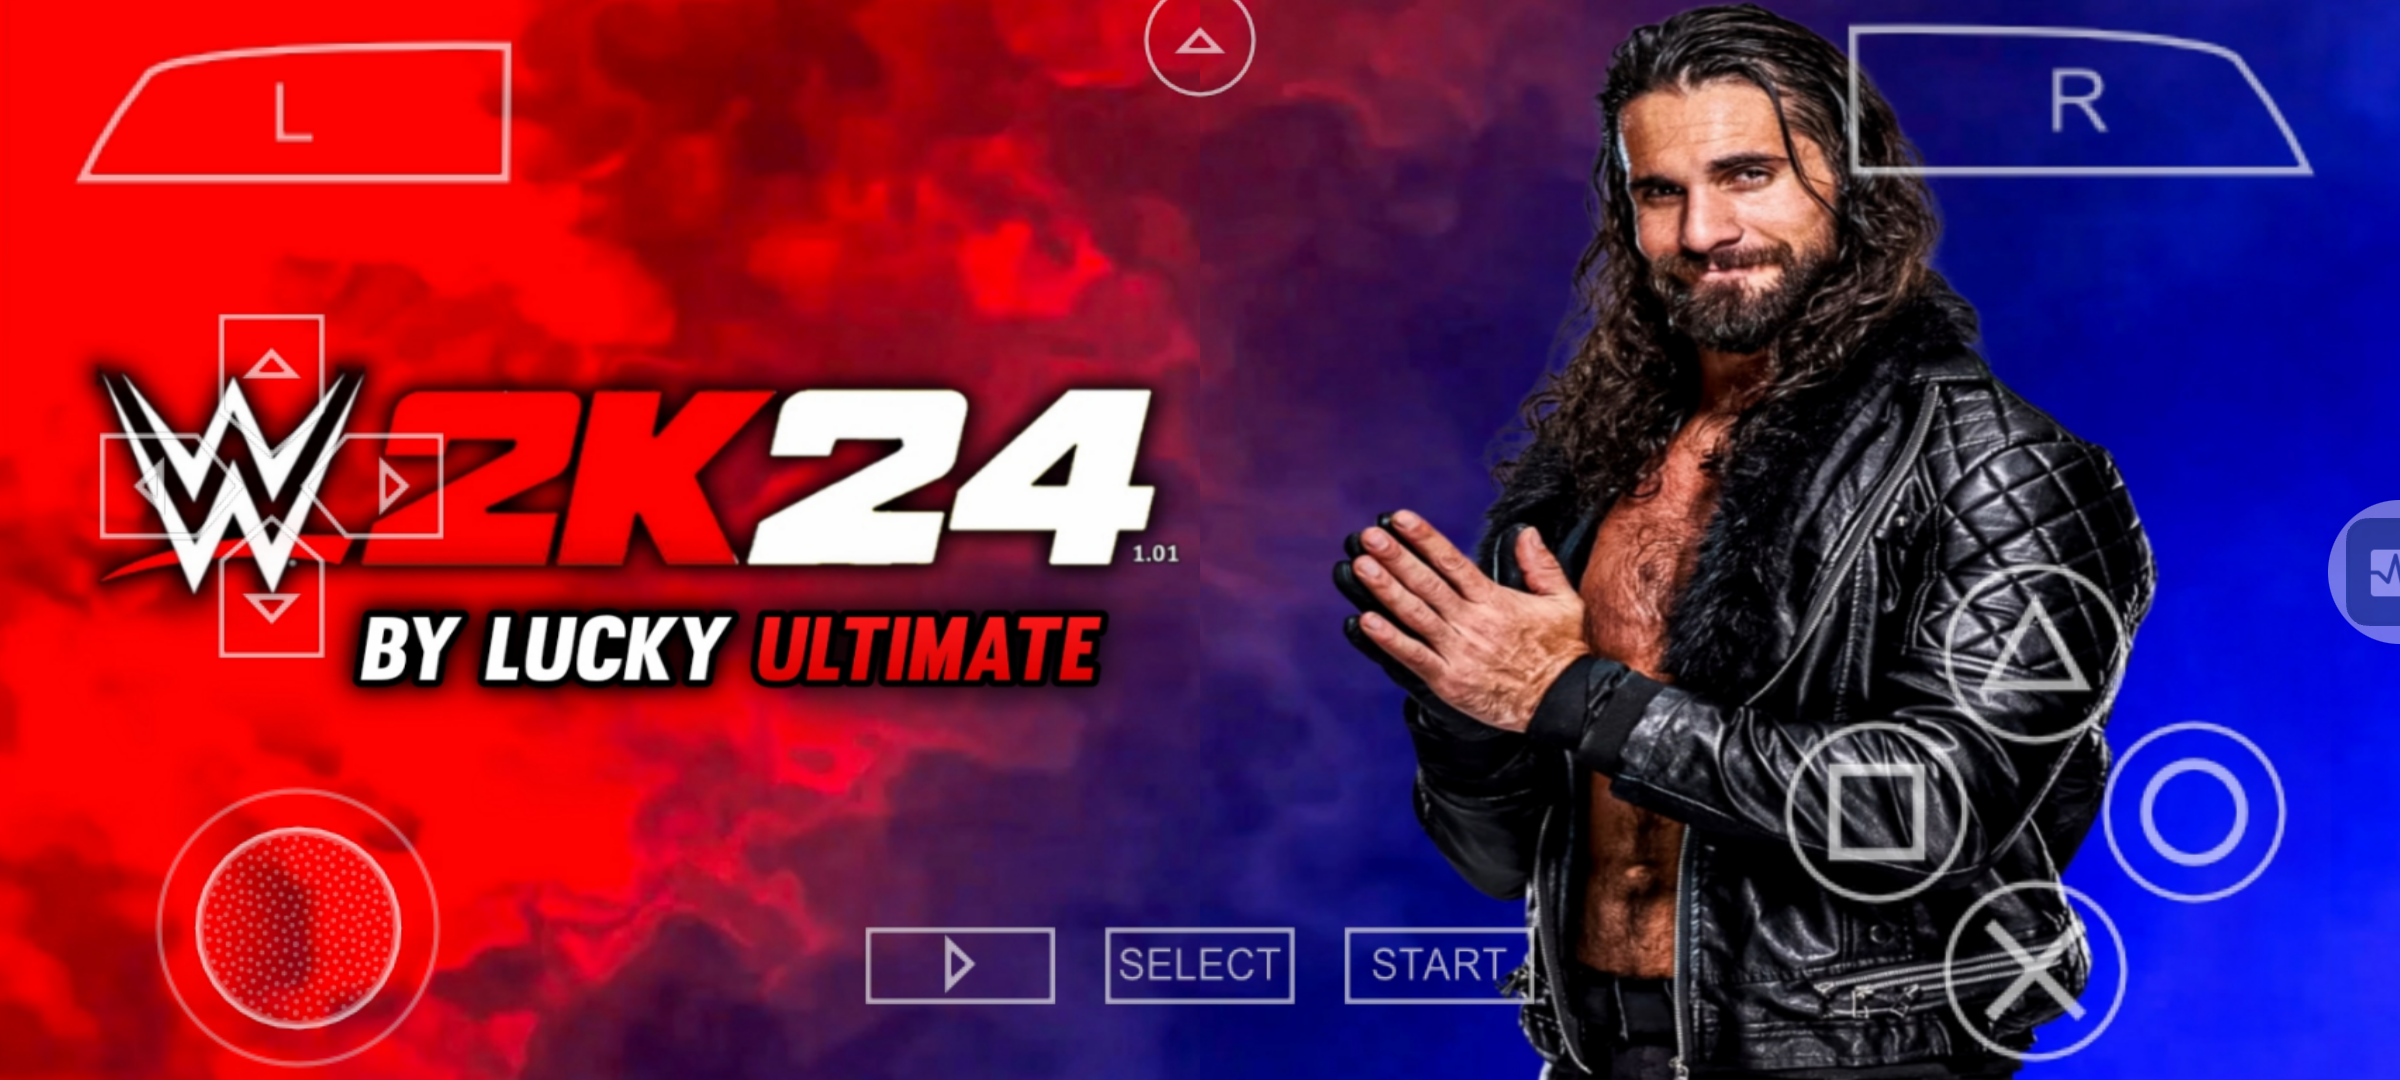 WWE 2K24 PPSSPP ANDROID